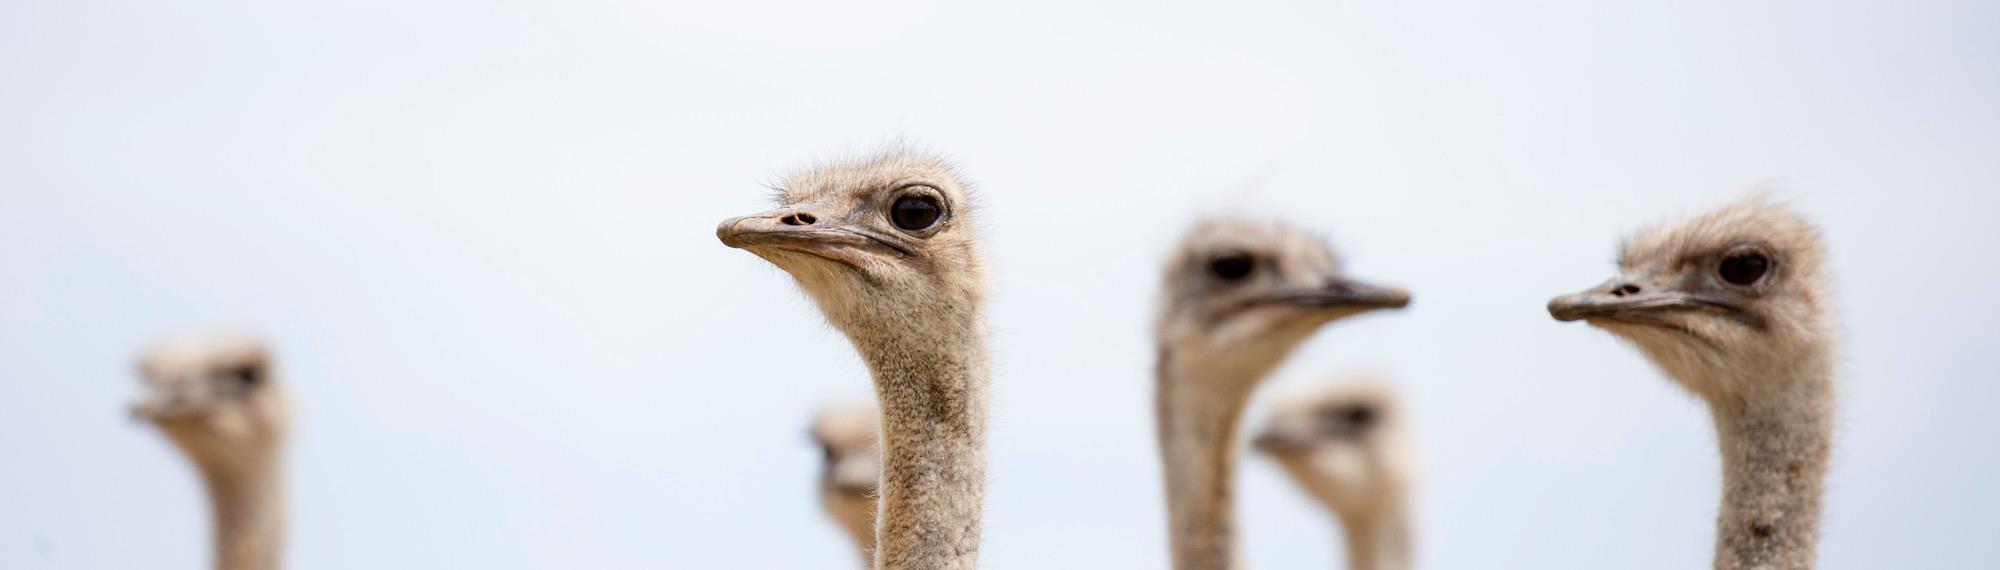 Six ostrich heads looking in different directions.